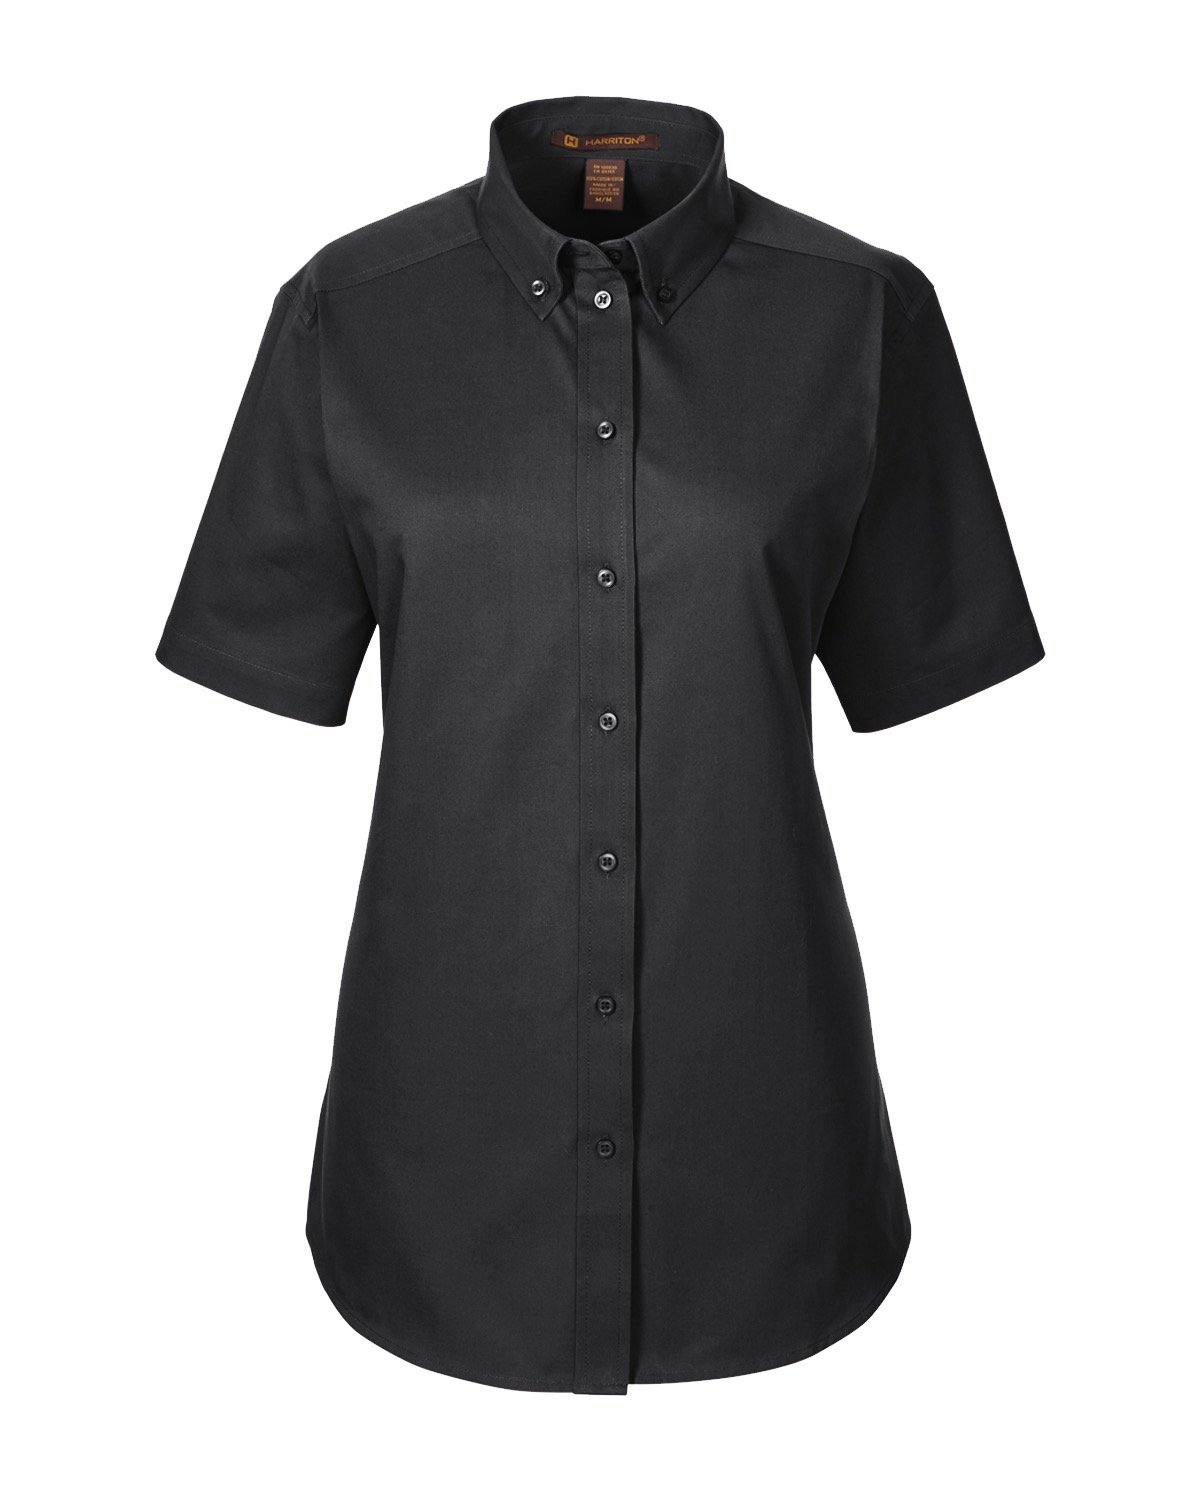 Picture of Harriton Women's Foundation 100% Cotton Short-Sleeve Twill Shirt with Teflon™